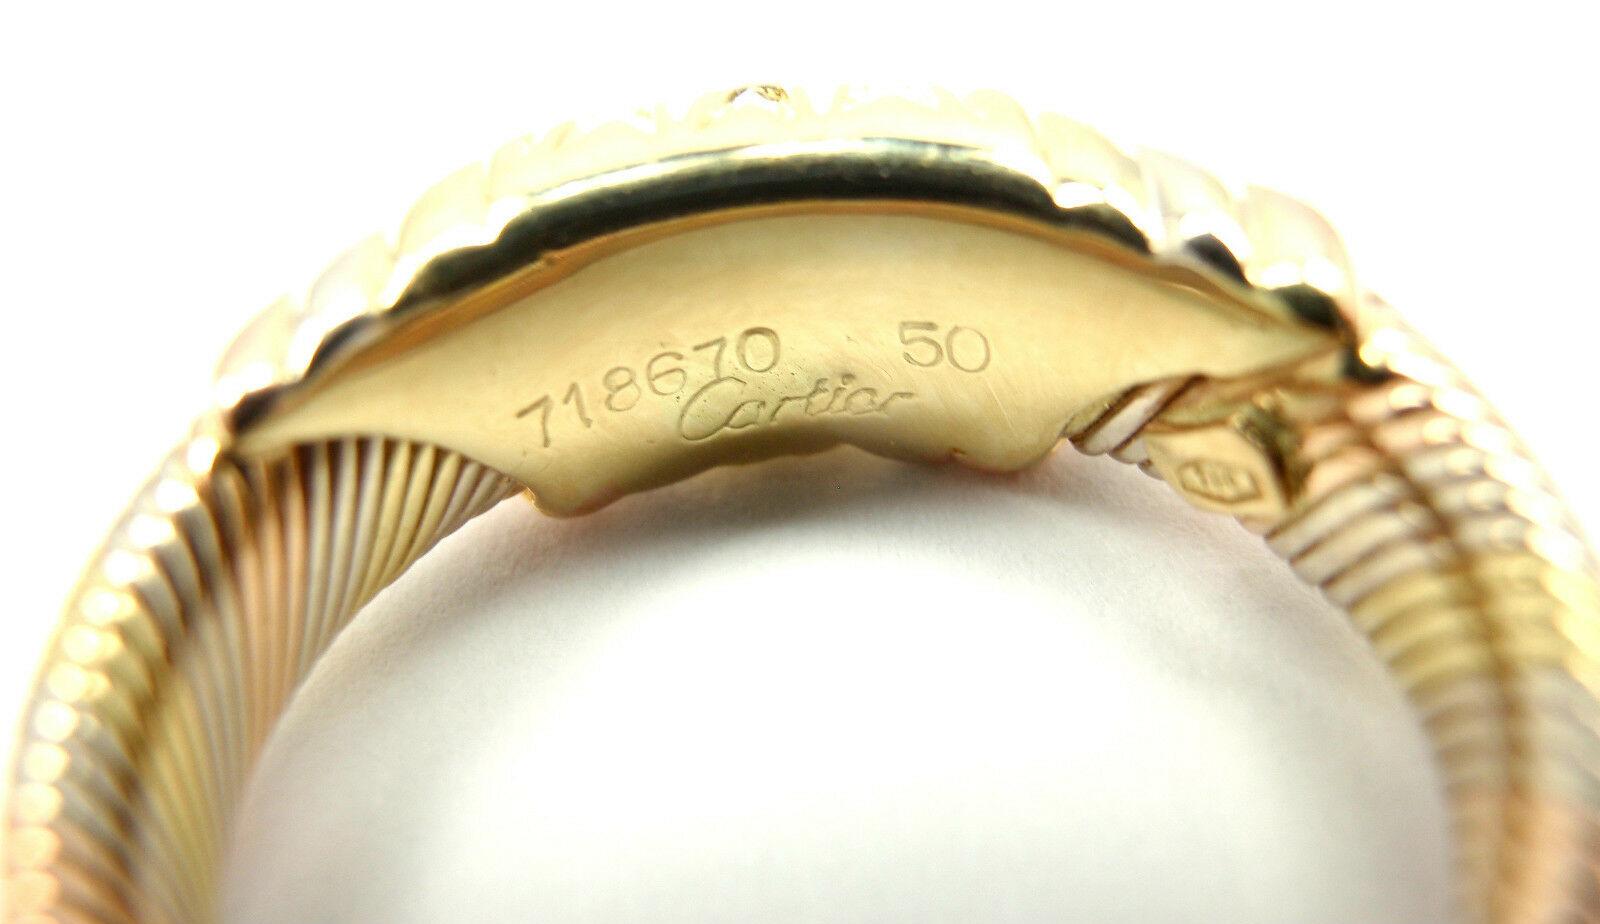 Cartier Diamond Tri-Color Gold Band Ring In Excellent Condition For Sale In Holland, PA